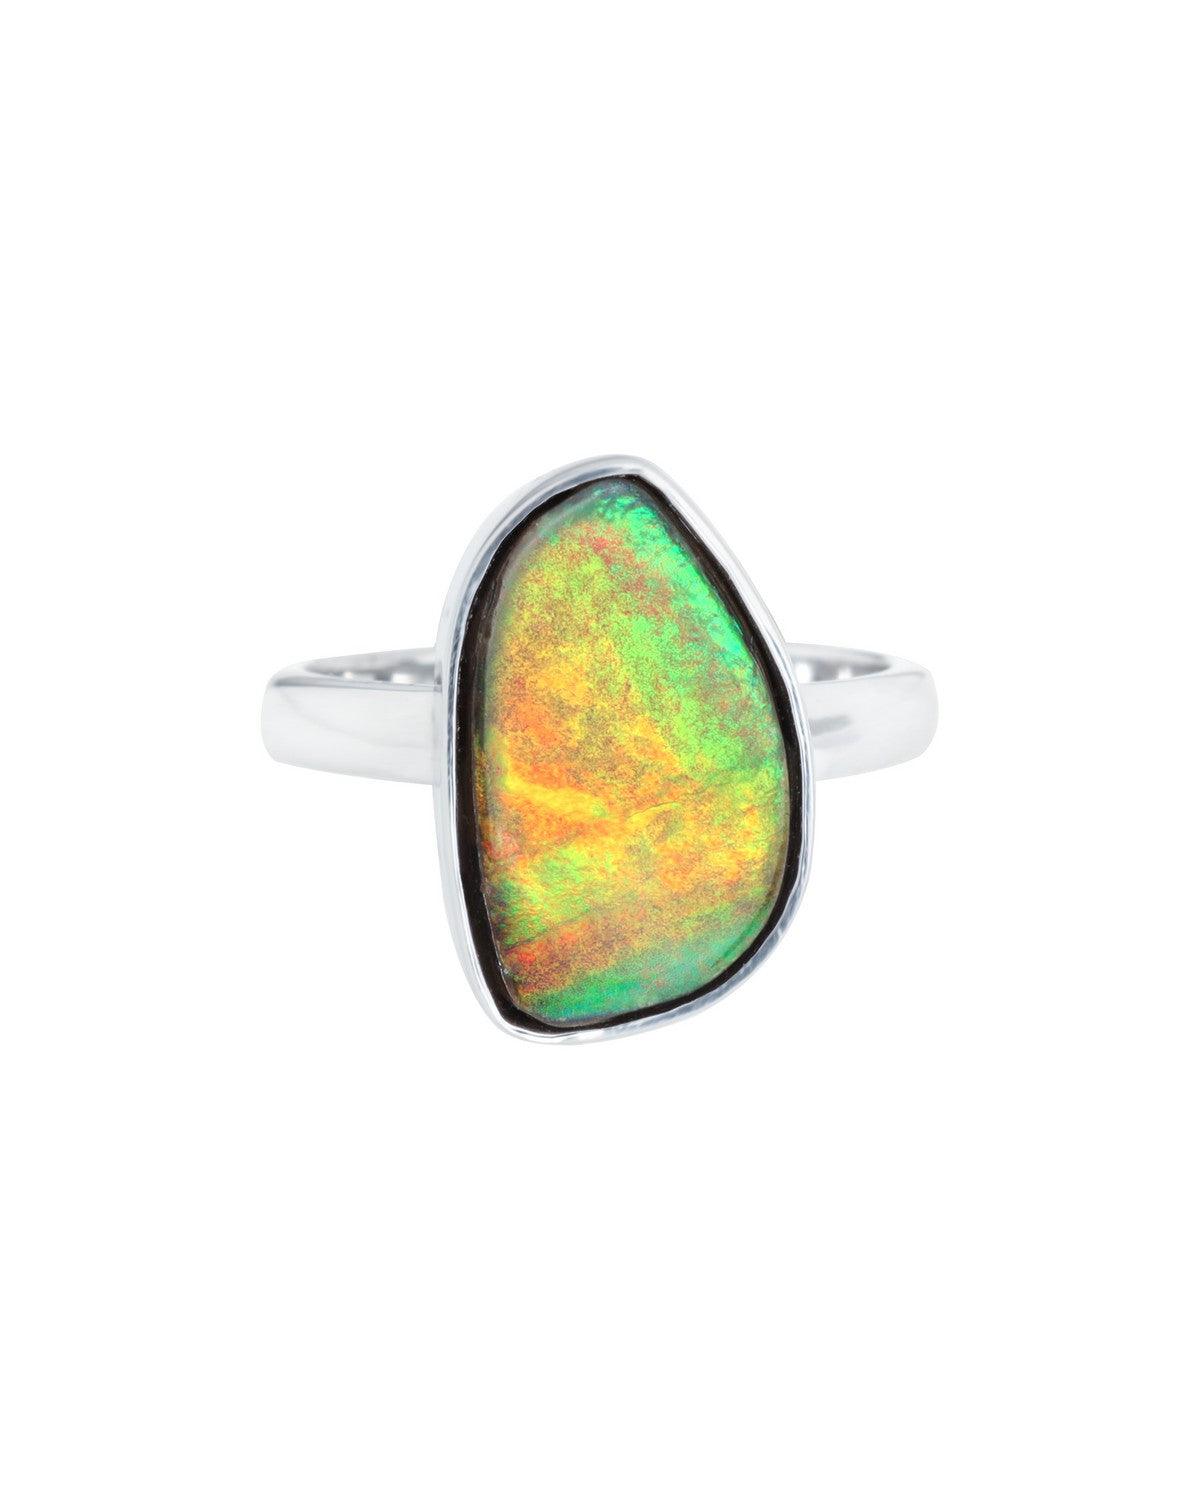 4.35 Ct. Ammolite Solid 925 Sterling Silver Statement Ring Jewelry - YoTreasure